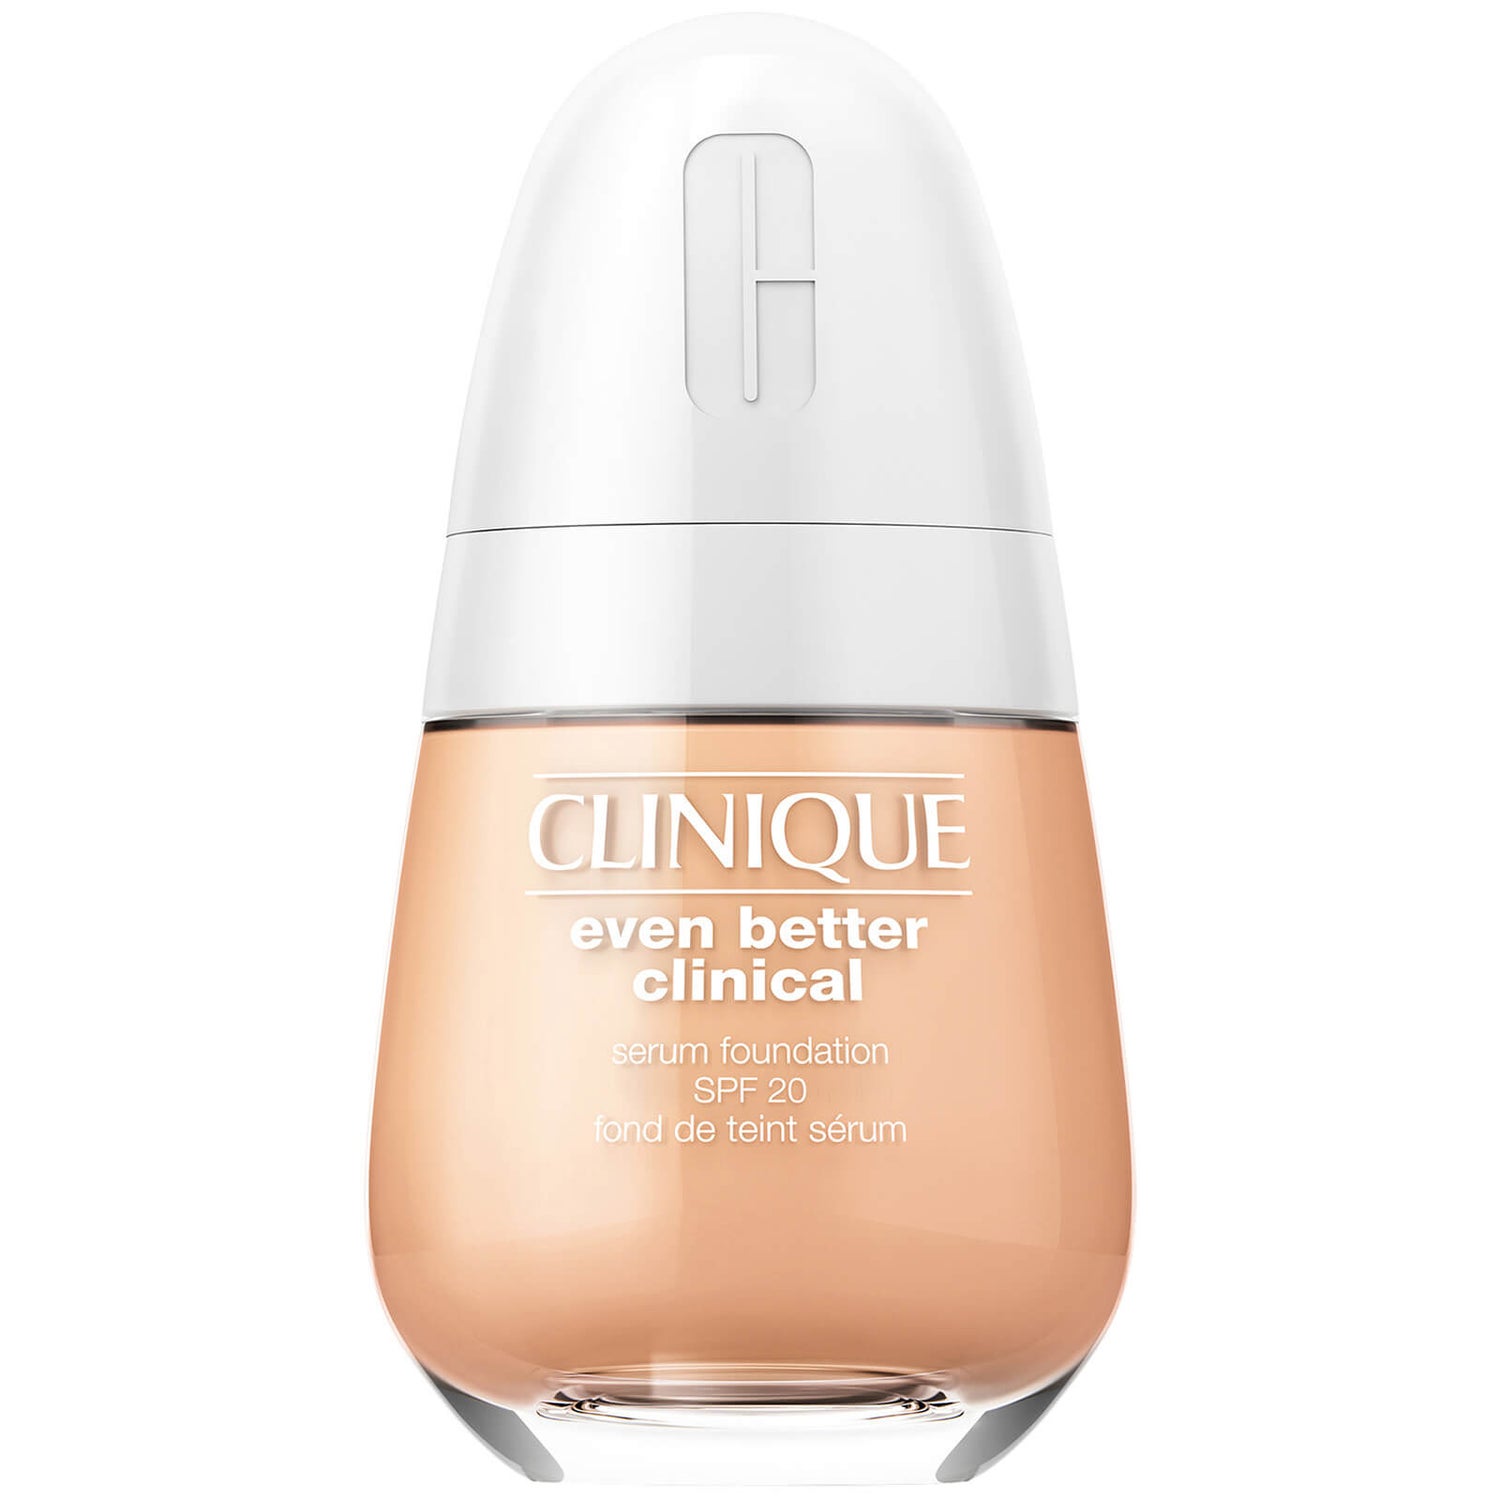 Clinique Even Better Clinical Serum Foundation SPF20 30ml (Various Shades)